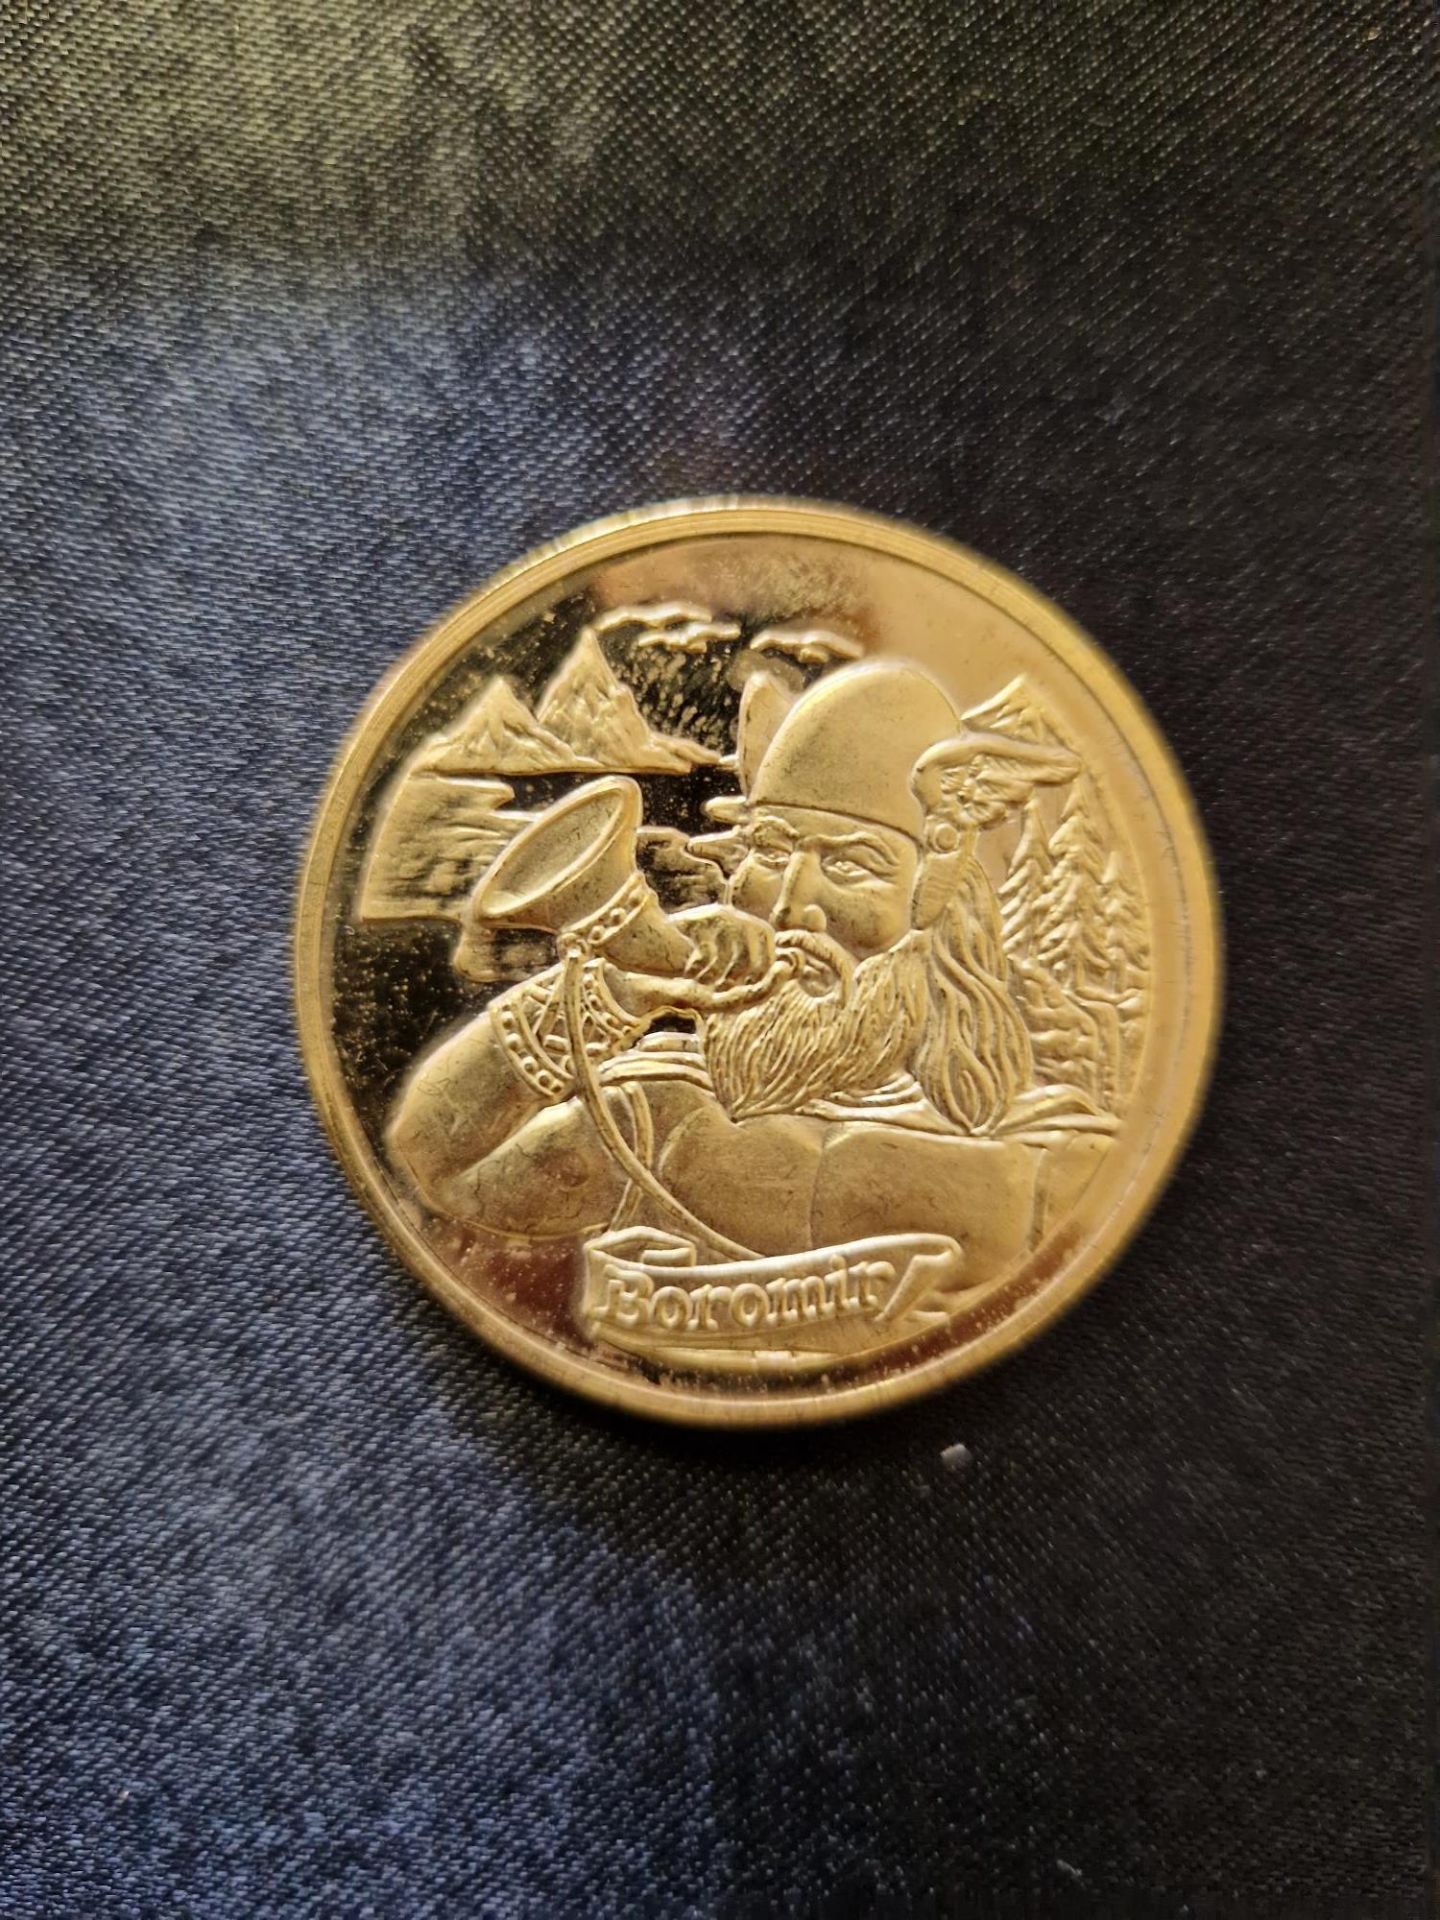 Lord Of The Rings 24K Gold Plated Collectors Coin